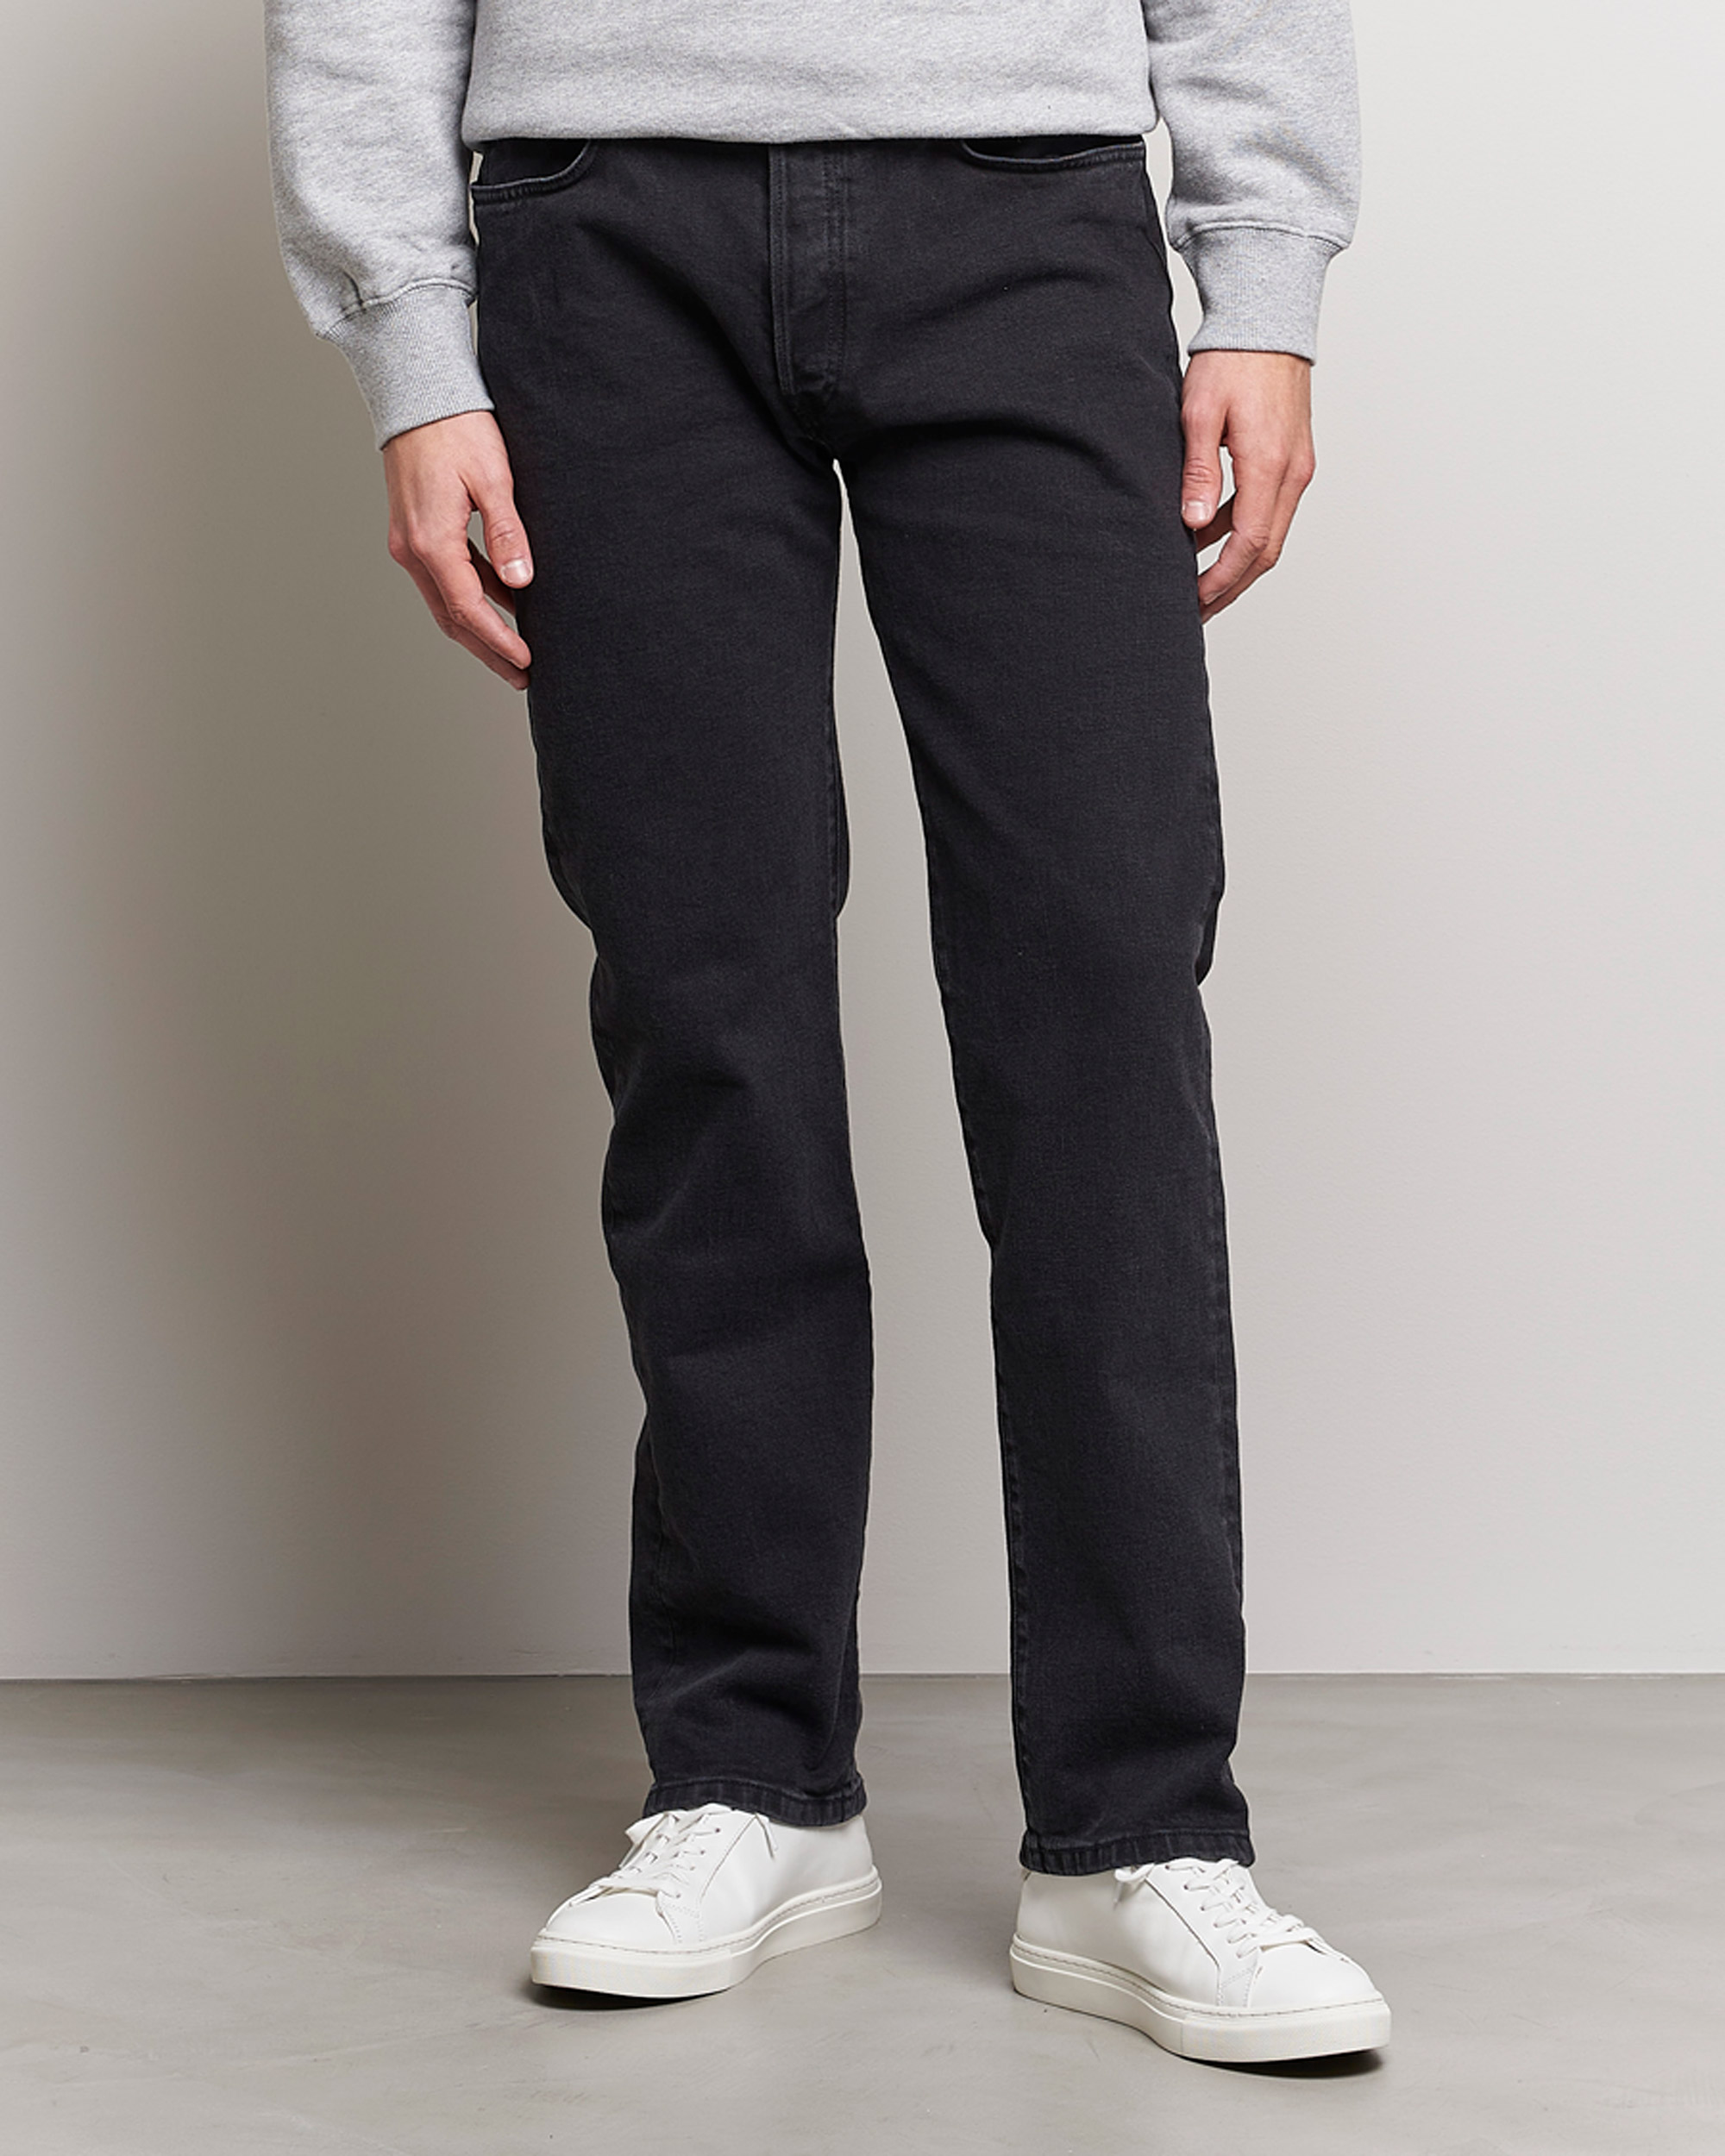 Hombres | Straight leg | Jeanerica | CM002 Classic Jeans Black 2 Weeks